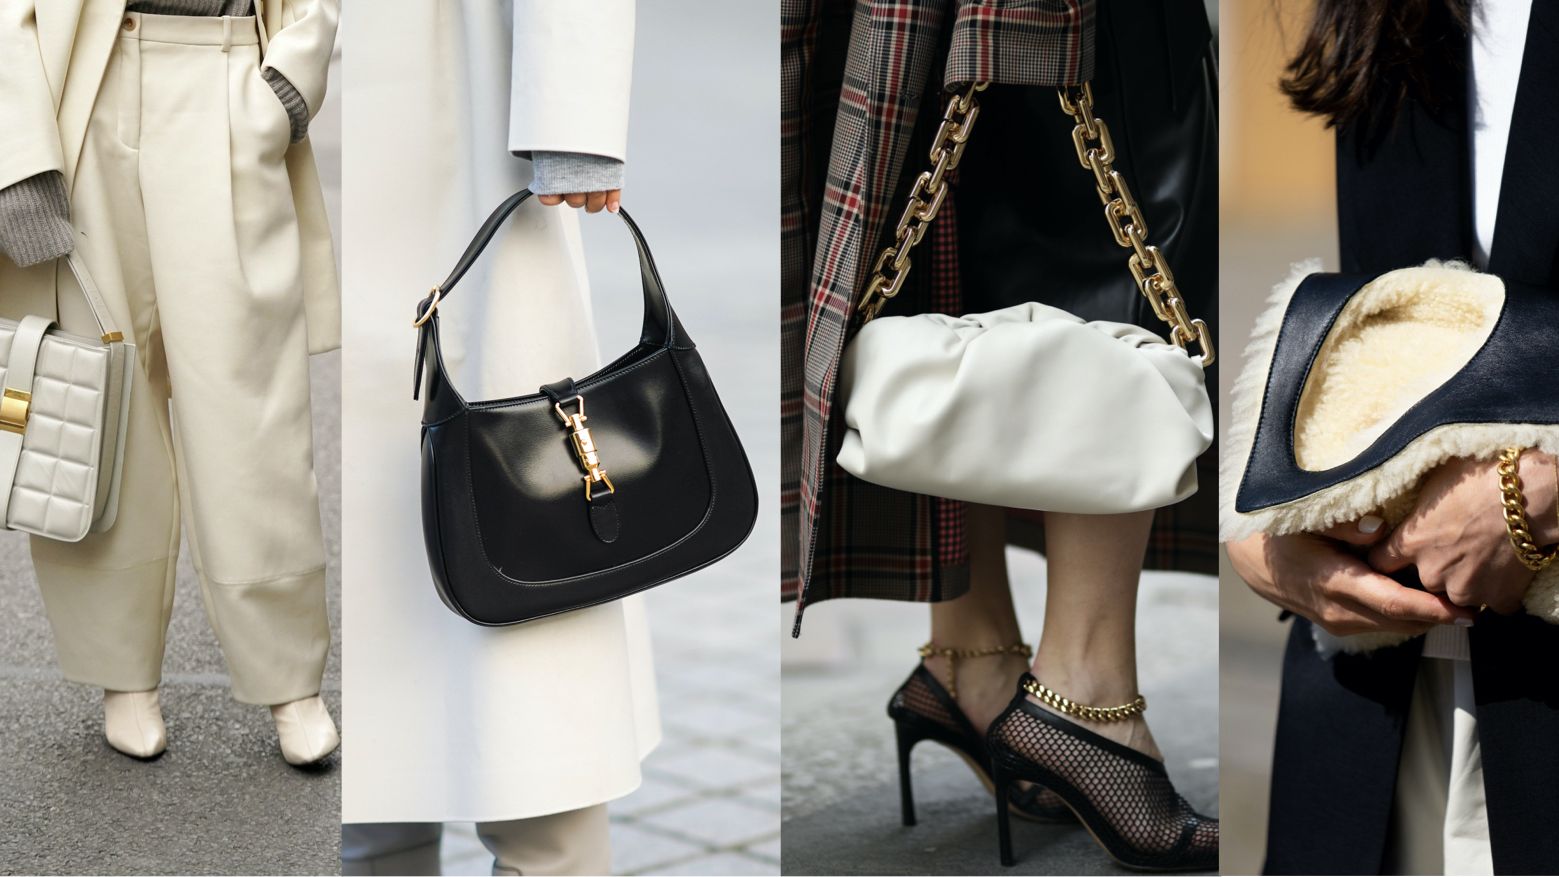 Most stylish bag trends that will rule 2021 - Times of India